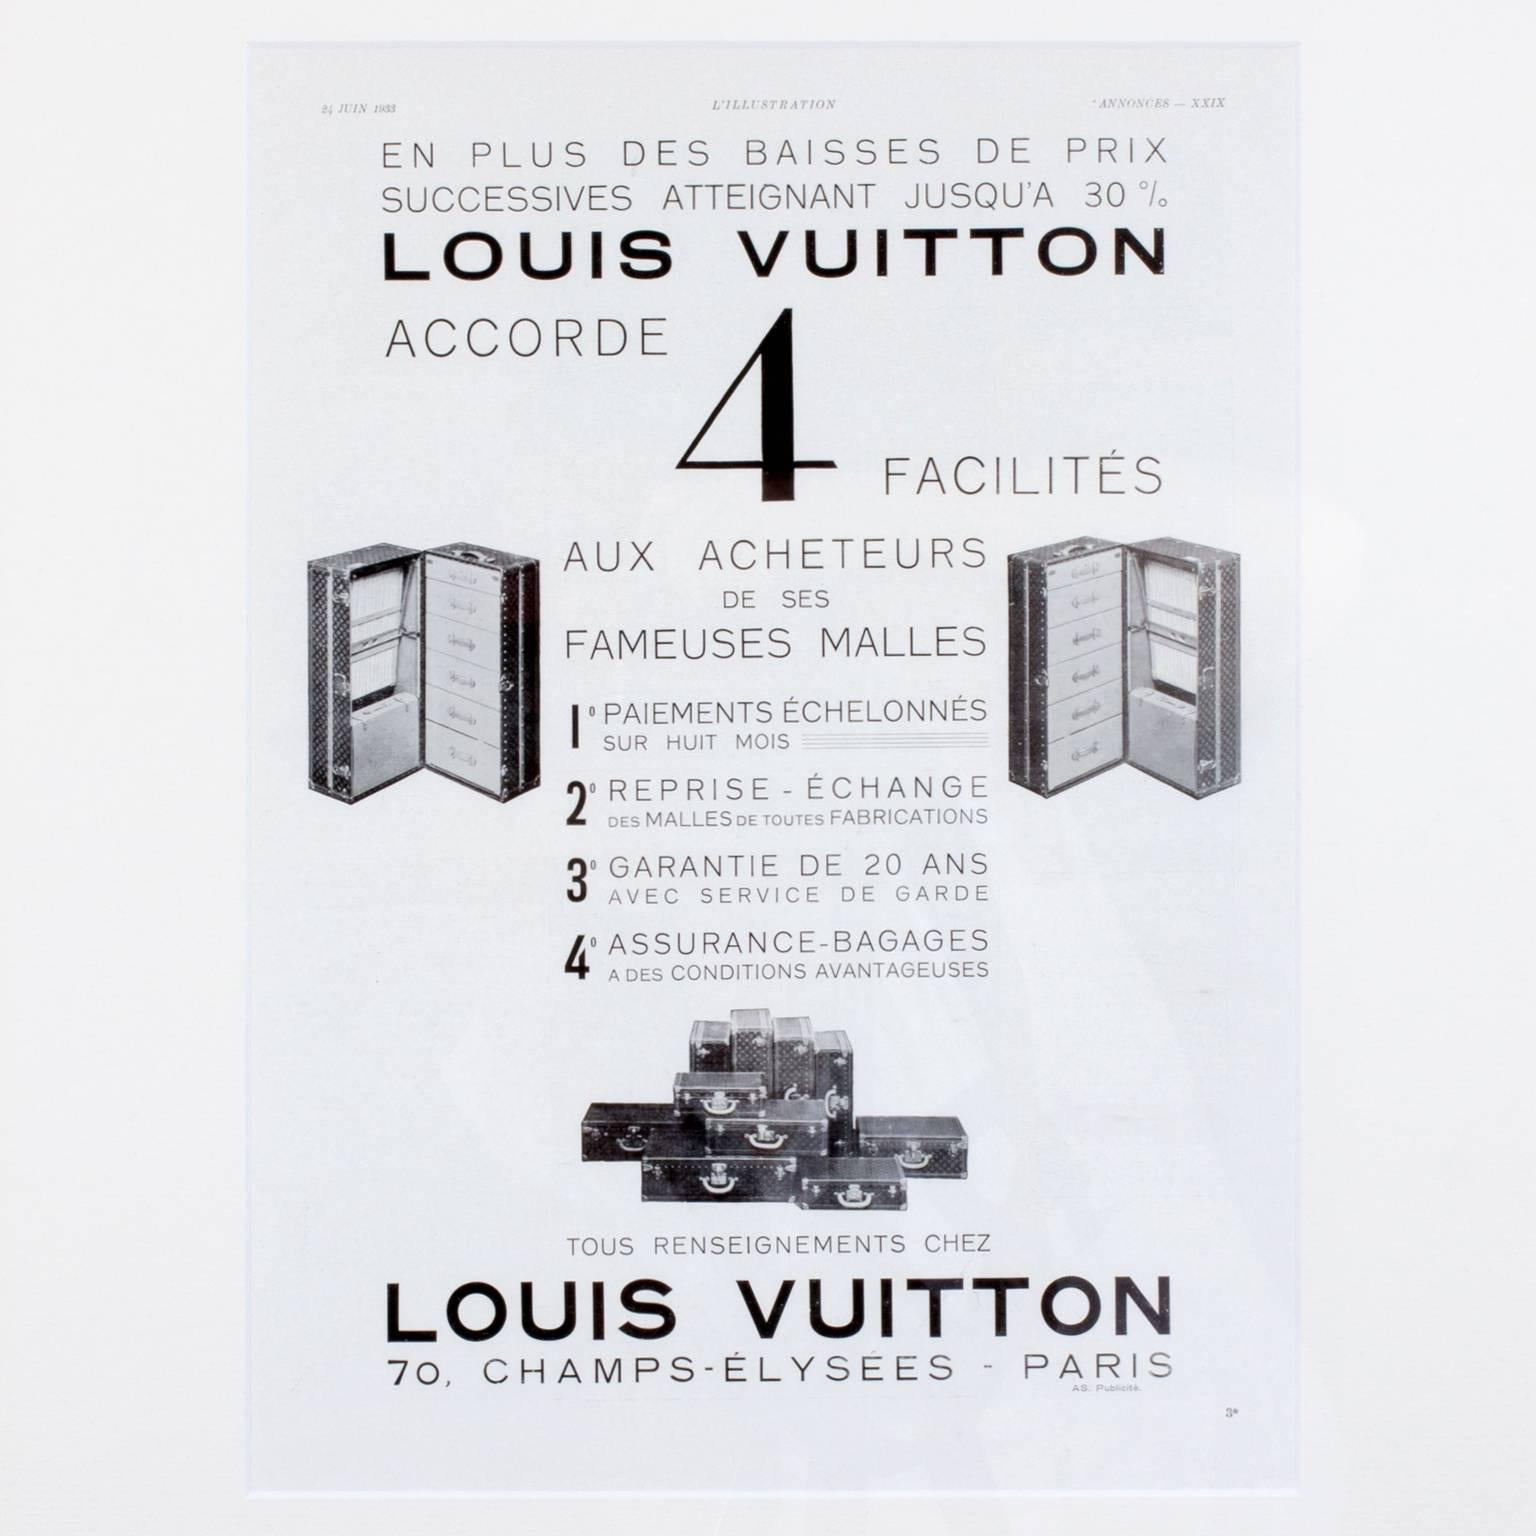 Discovered during our time perusing the Parisian Puces markets, this is an original vintage French advertisement from the 1930's. Framed in a subtle Italian gilt frame.  The Louis Vuitton brand is the epitome of French luxury.

New framing.